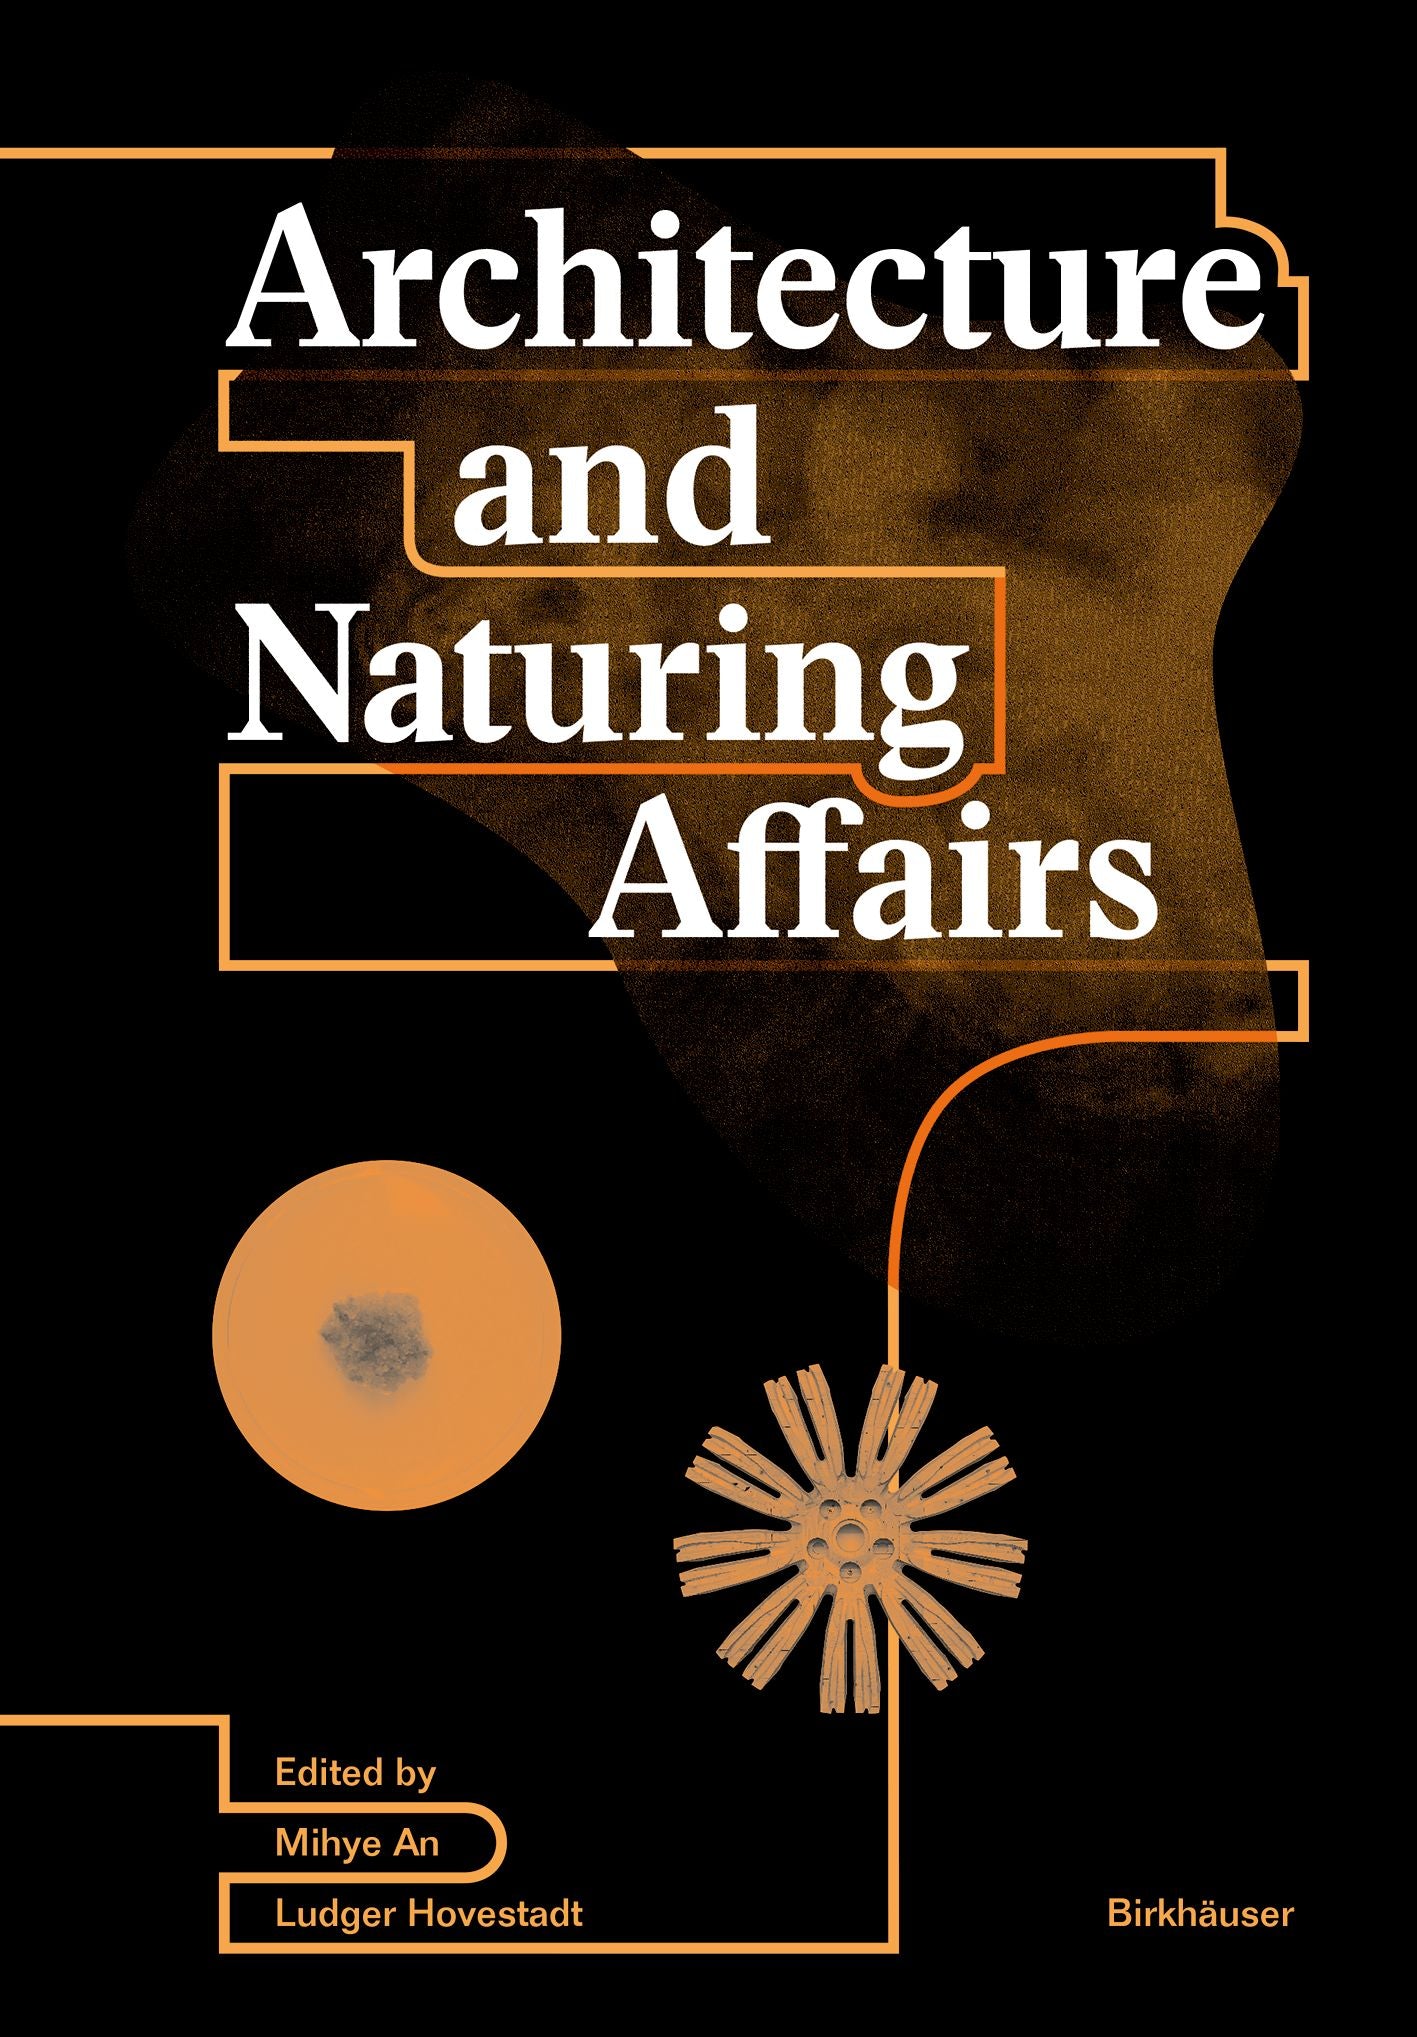 Architecture and Naturing Affairs cover